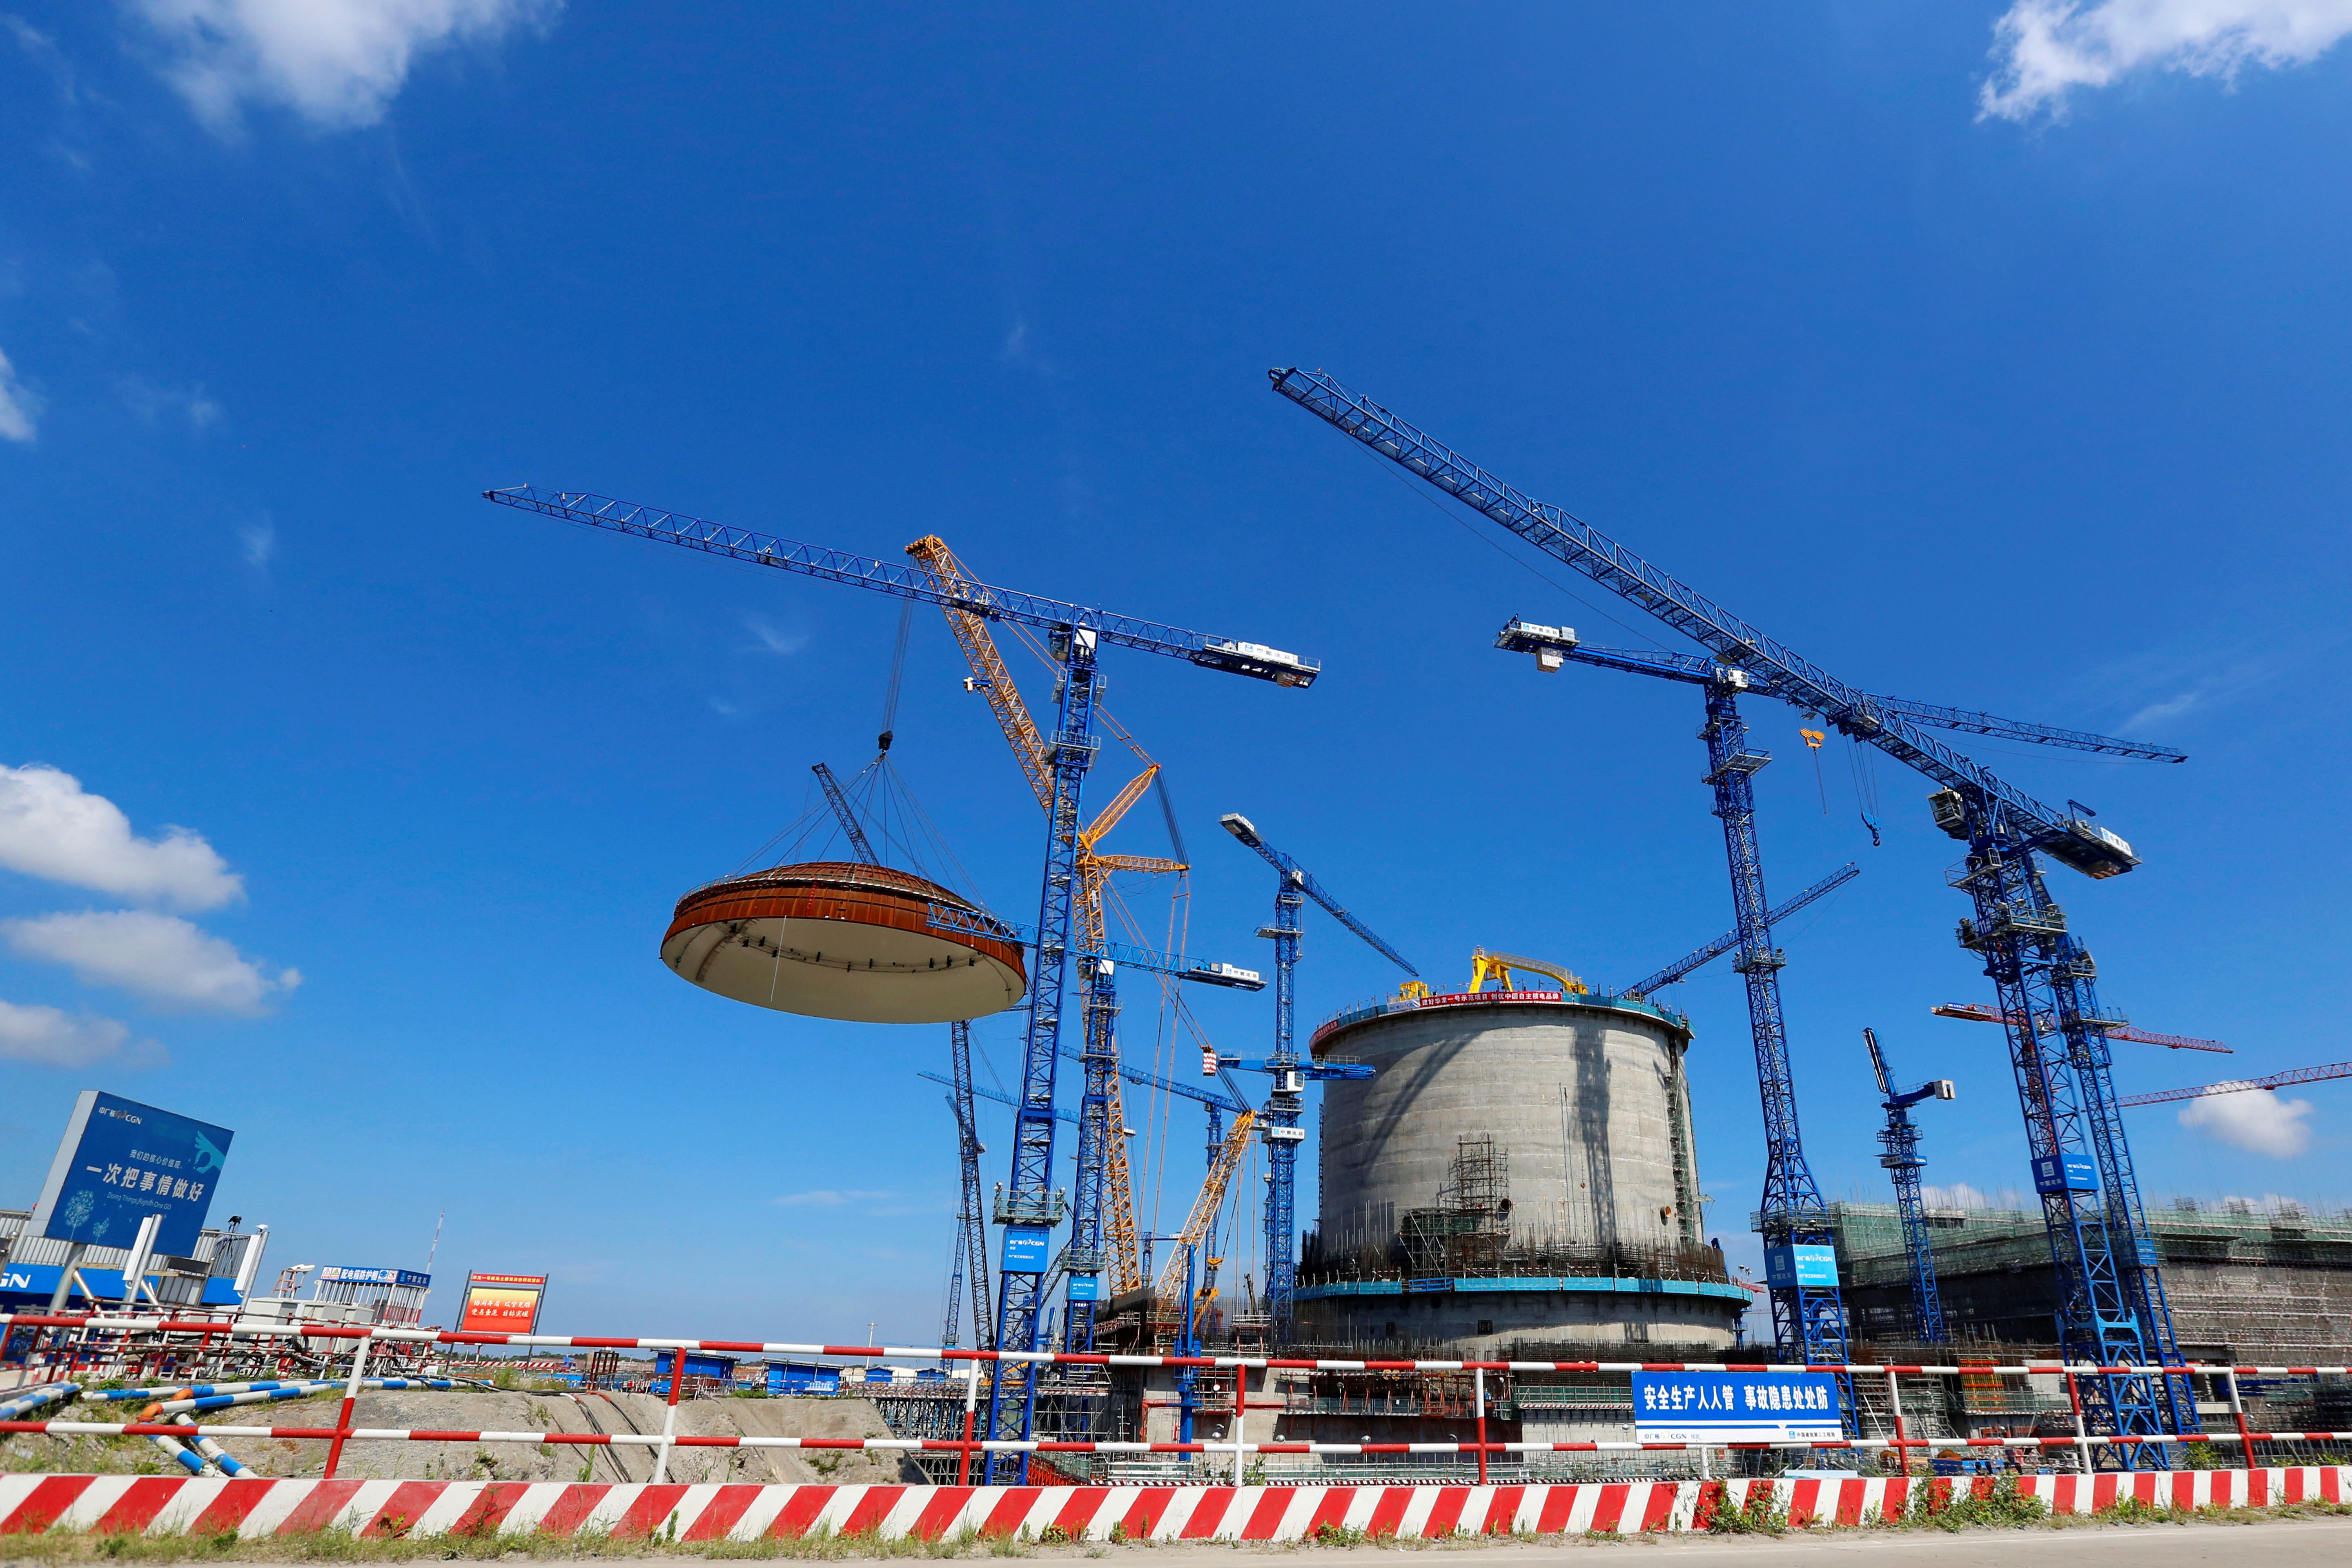 Dome is installed over a Hualong One nuclear power unit at Fangchenggang nuclear power plant in Guangxi